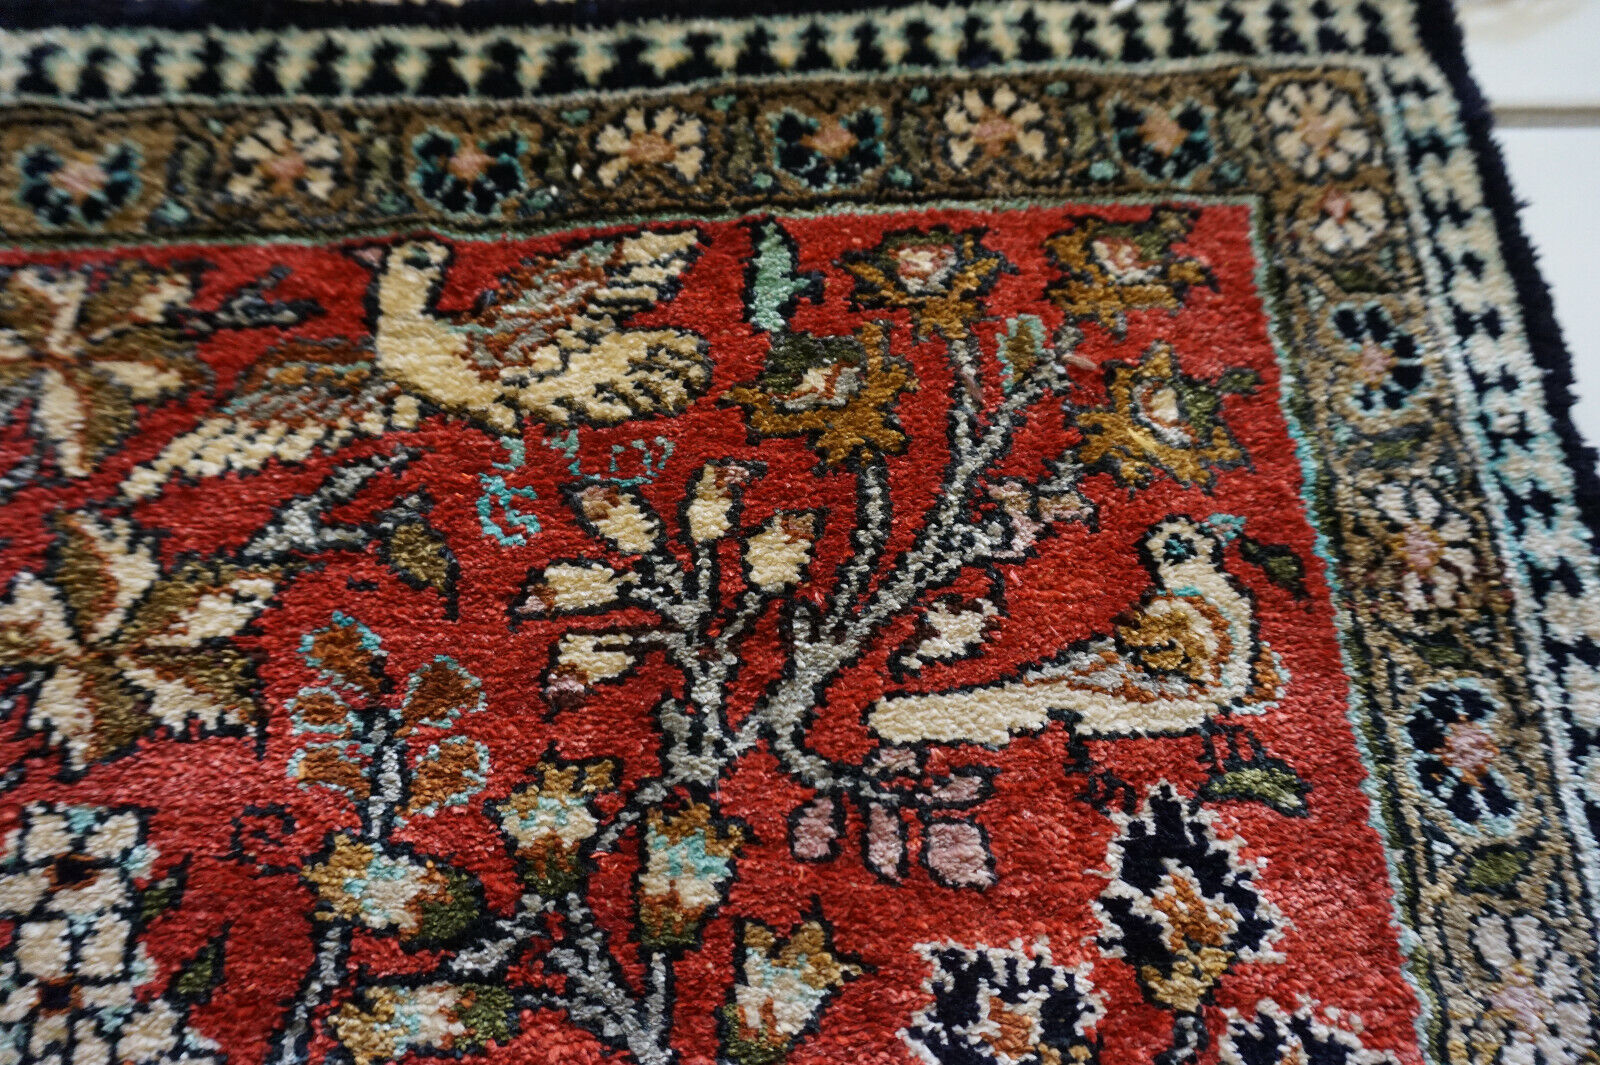 Side view of the Persian Qum silk rug highlighting its rectangular shape and size